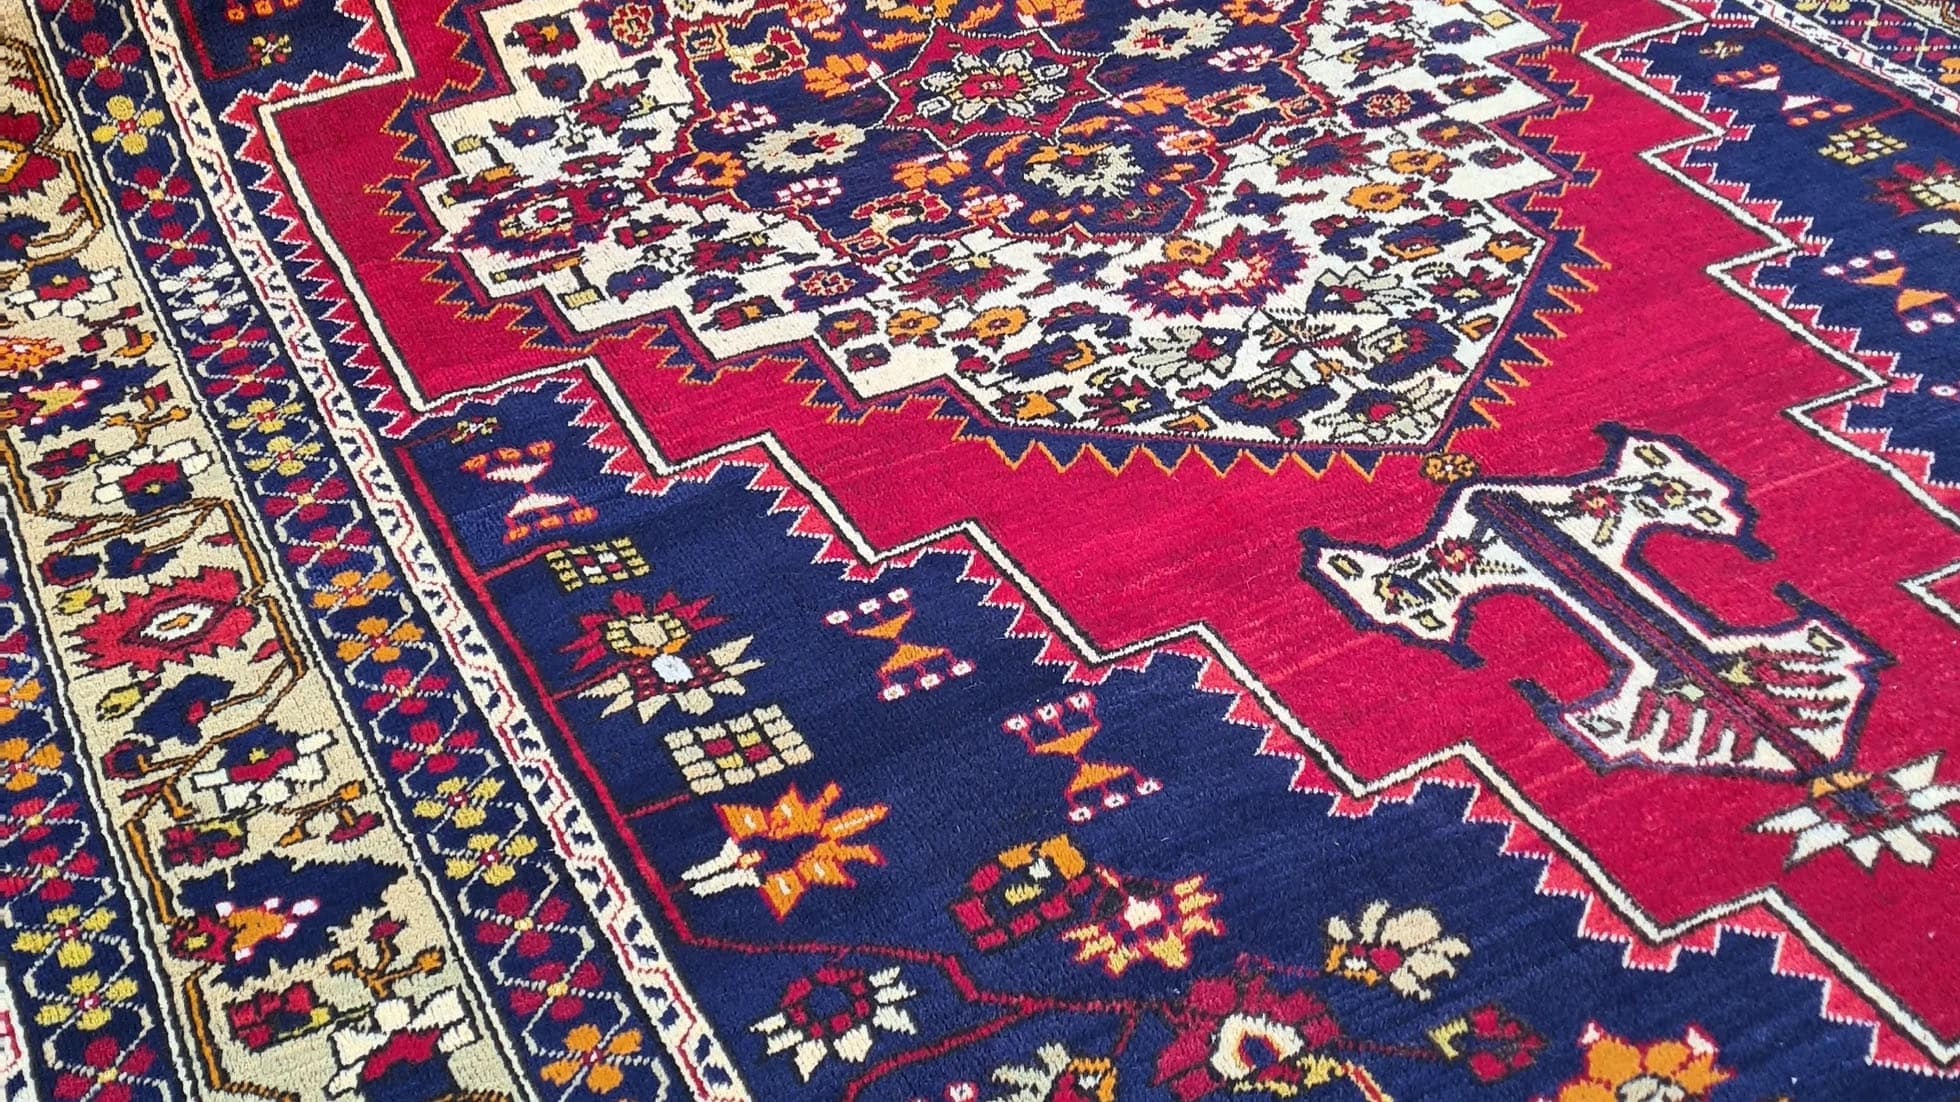 luxurious turkish oreintal carpet in red and blue by Kilim Couture New York